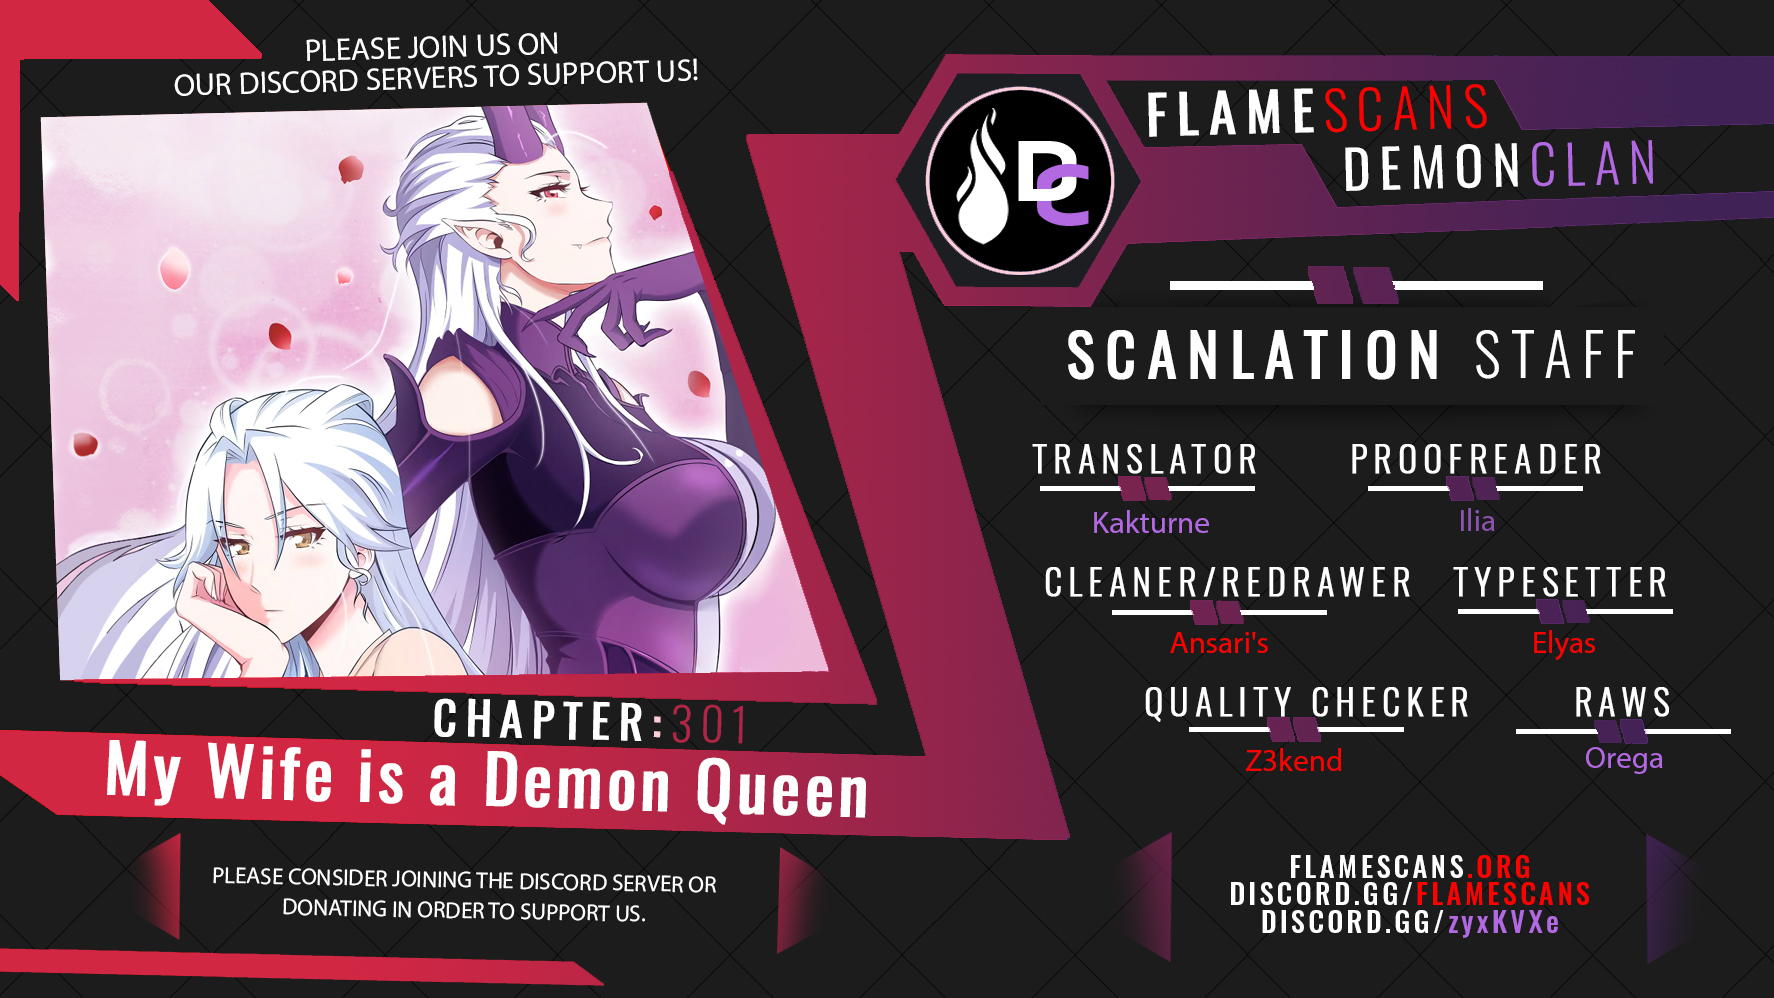 My Wife is a Demon Queen - Chapter 10919 - Image 1